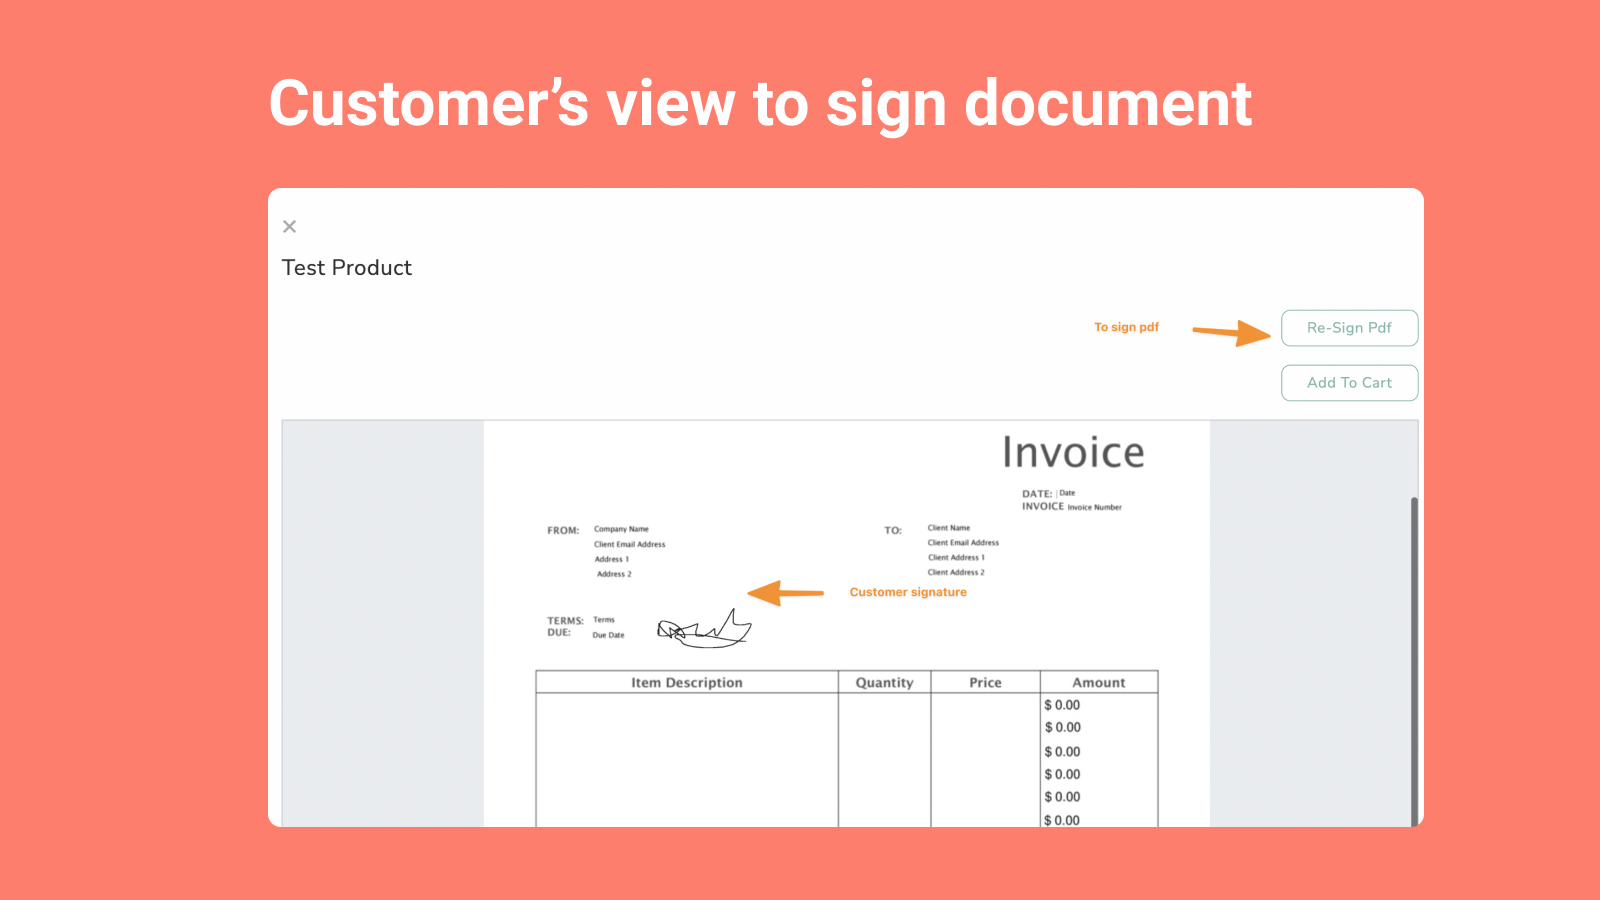 Customer's View to Sign the Document